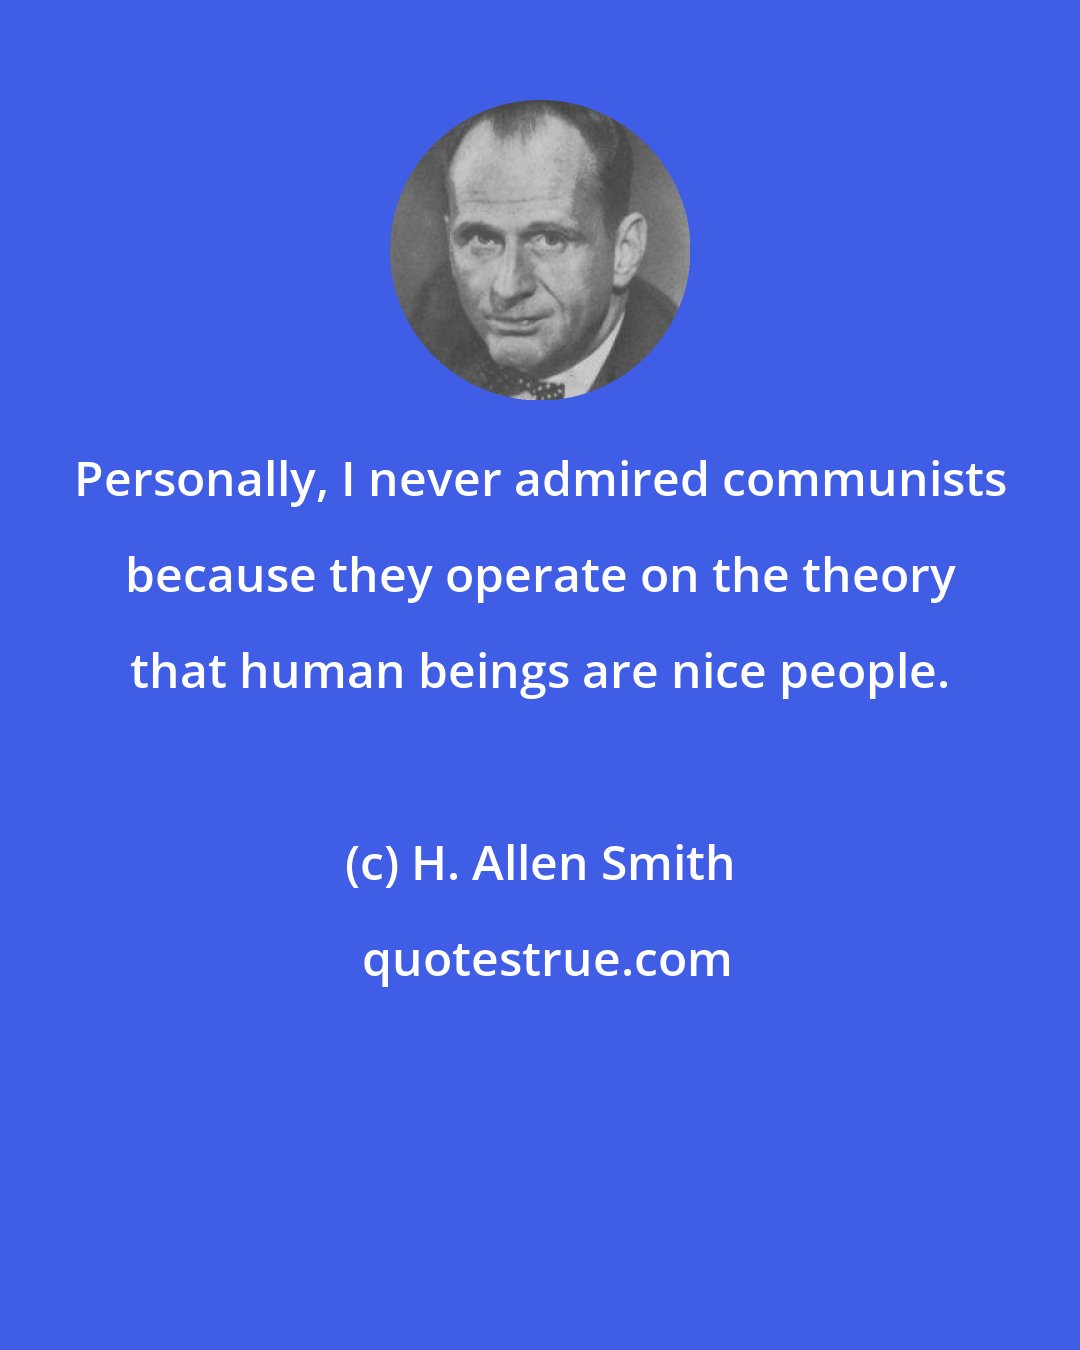 H. Allen Smith: Personally, I never admired communists because they operate on the theory that human beings are nice people.